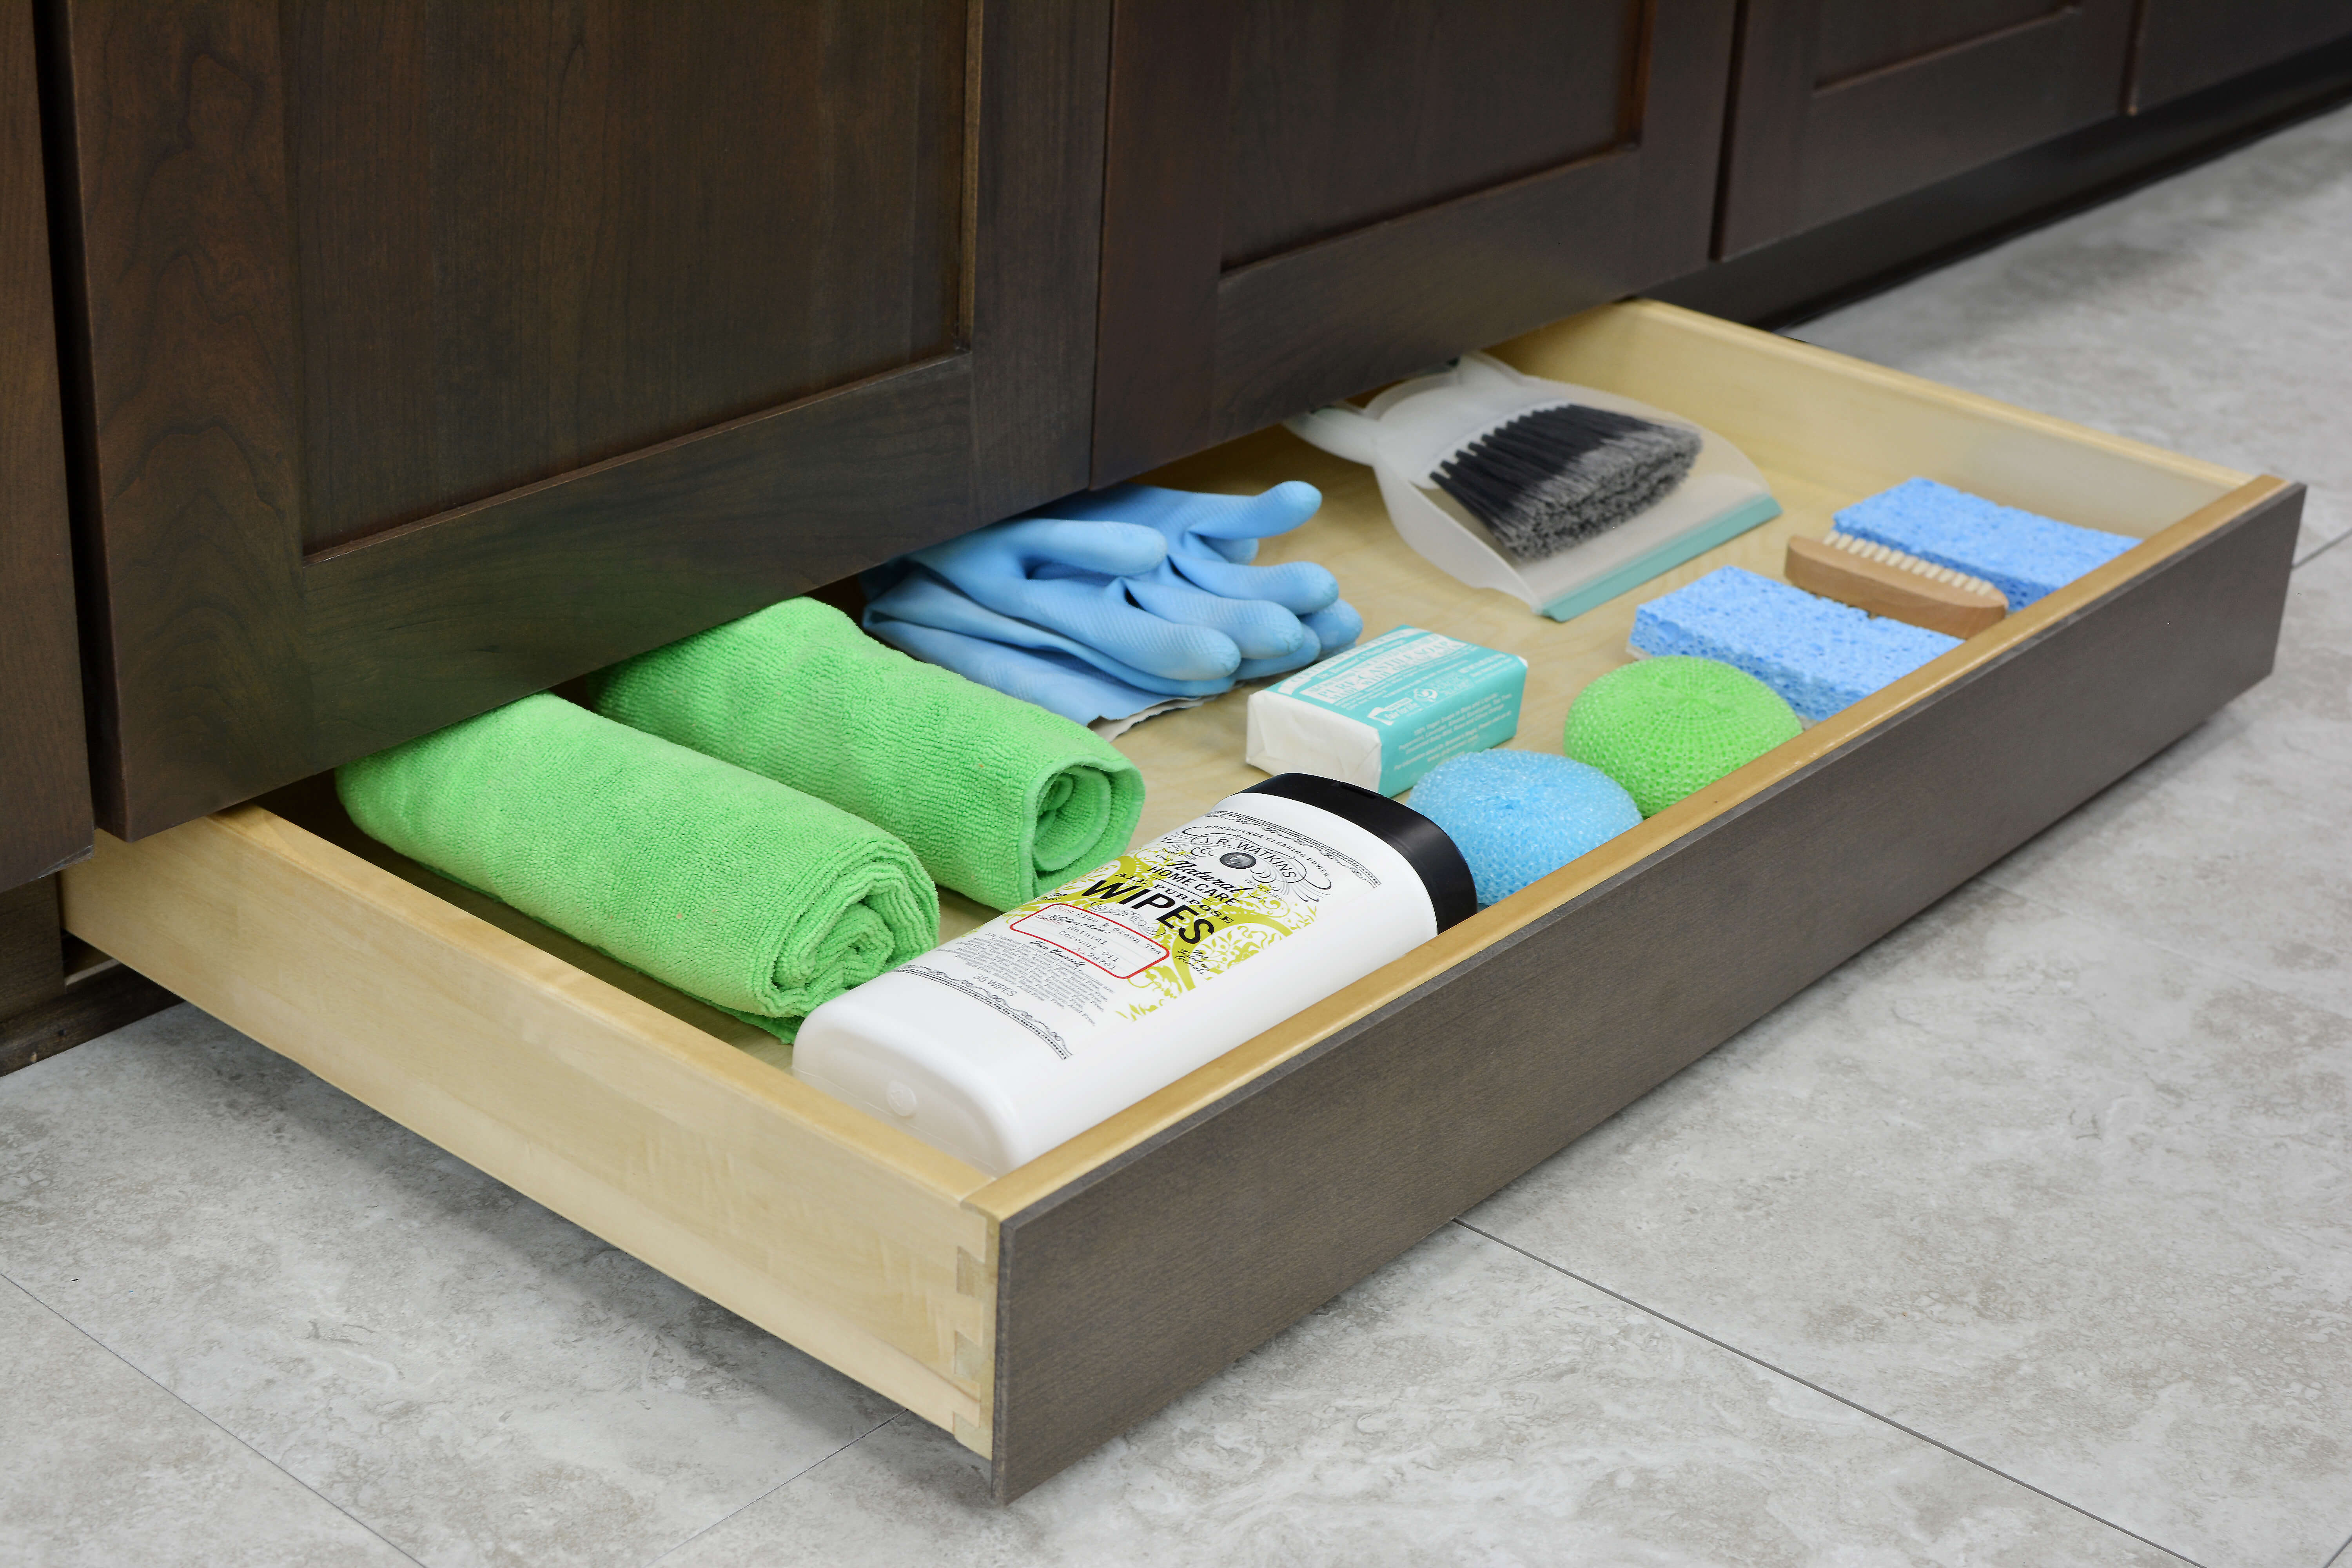 Miscellaneous items can find a home in a Dura Supreme Toe-Kick Drawer hidden at the foot of your cabinets. It is the perfect place for stashing cleaning supplies to they’re out of the way, yet close at hand.